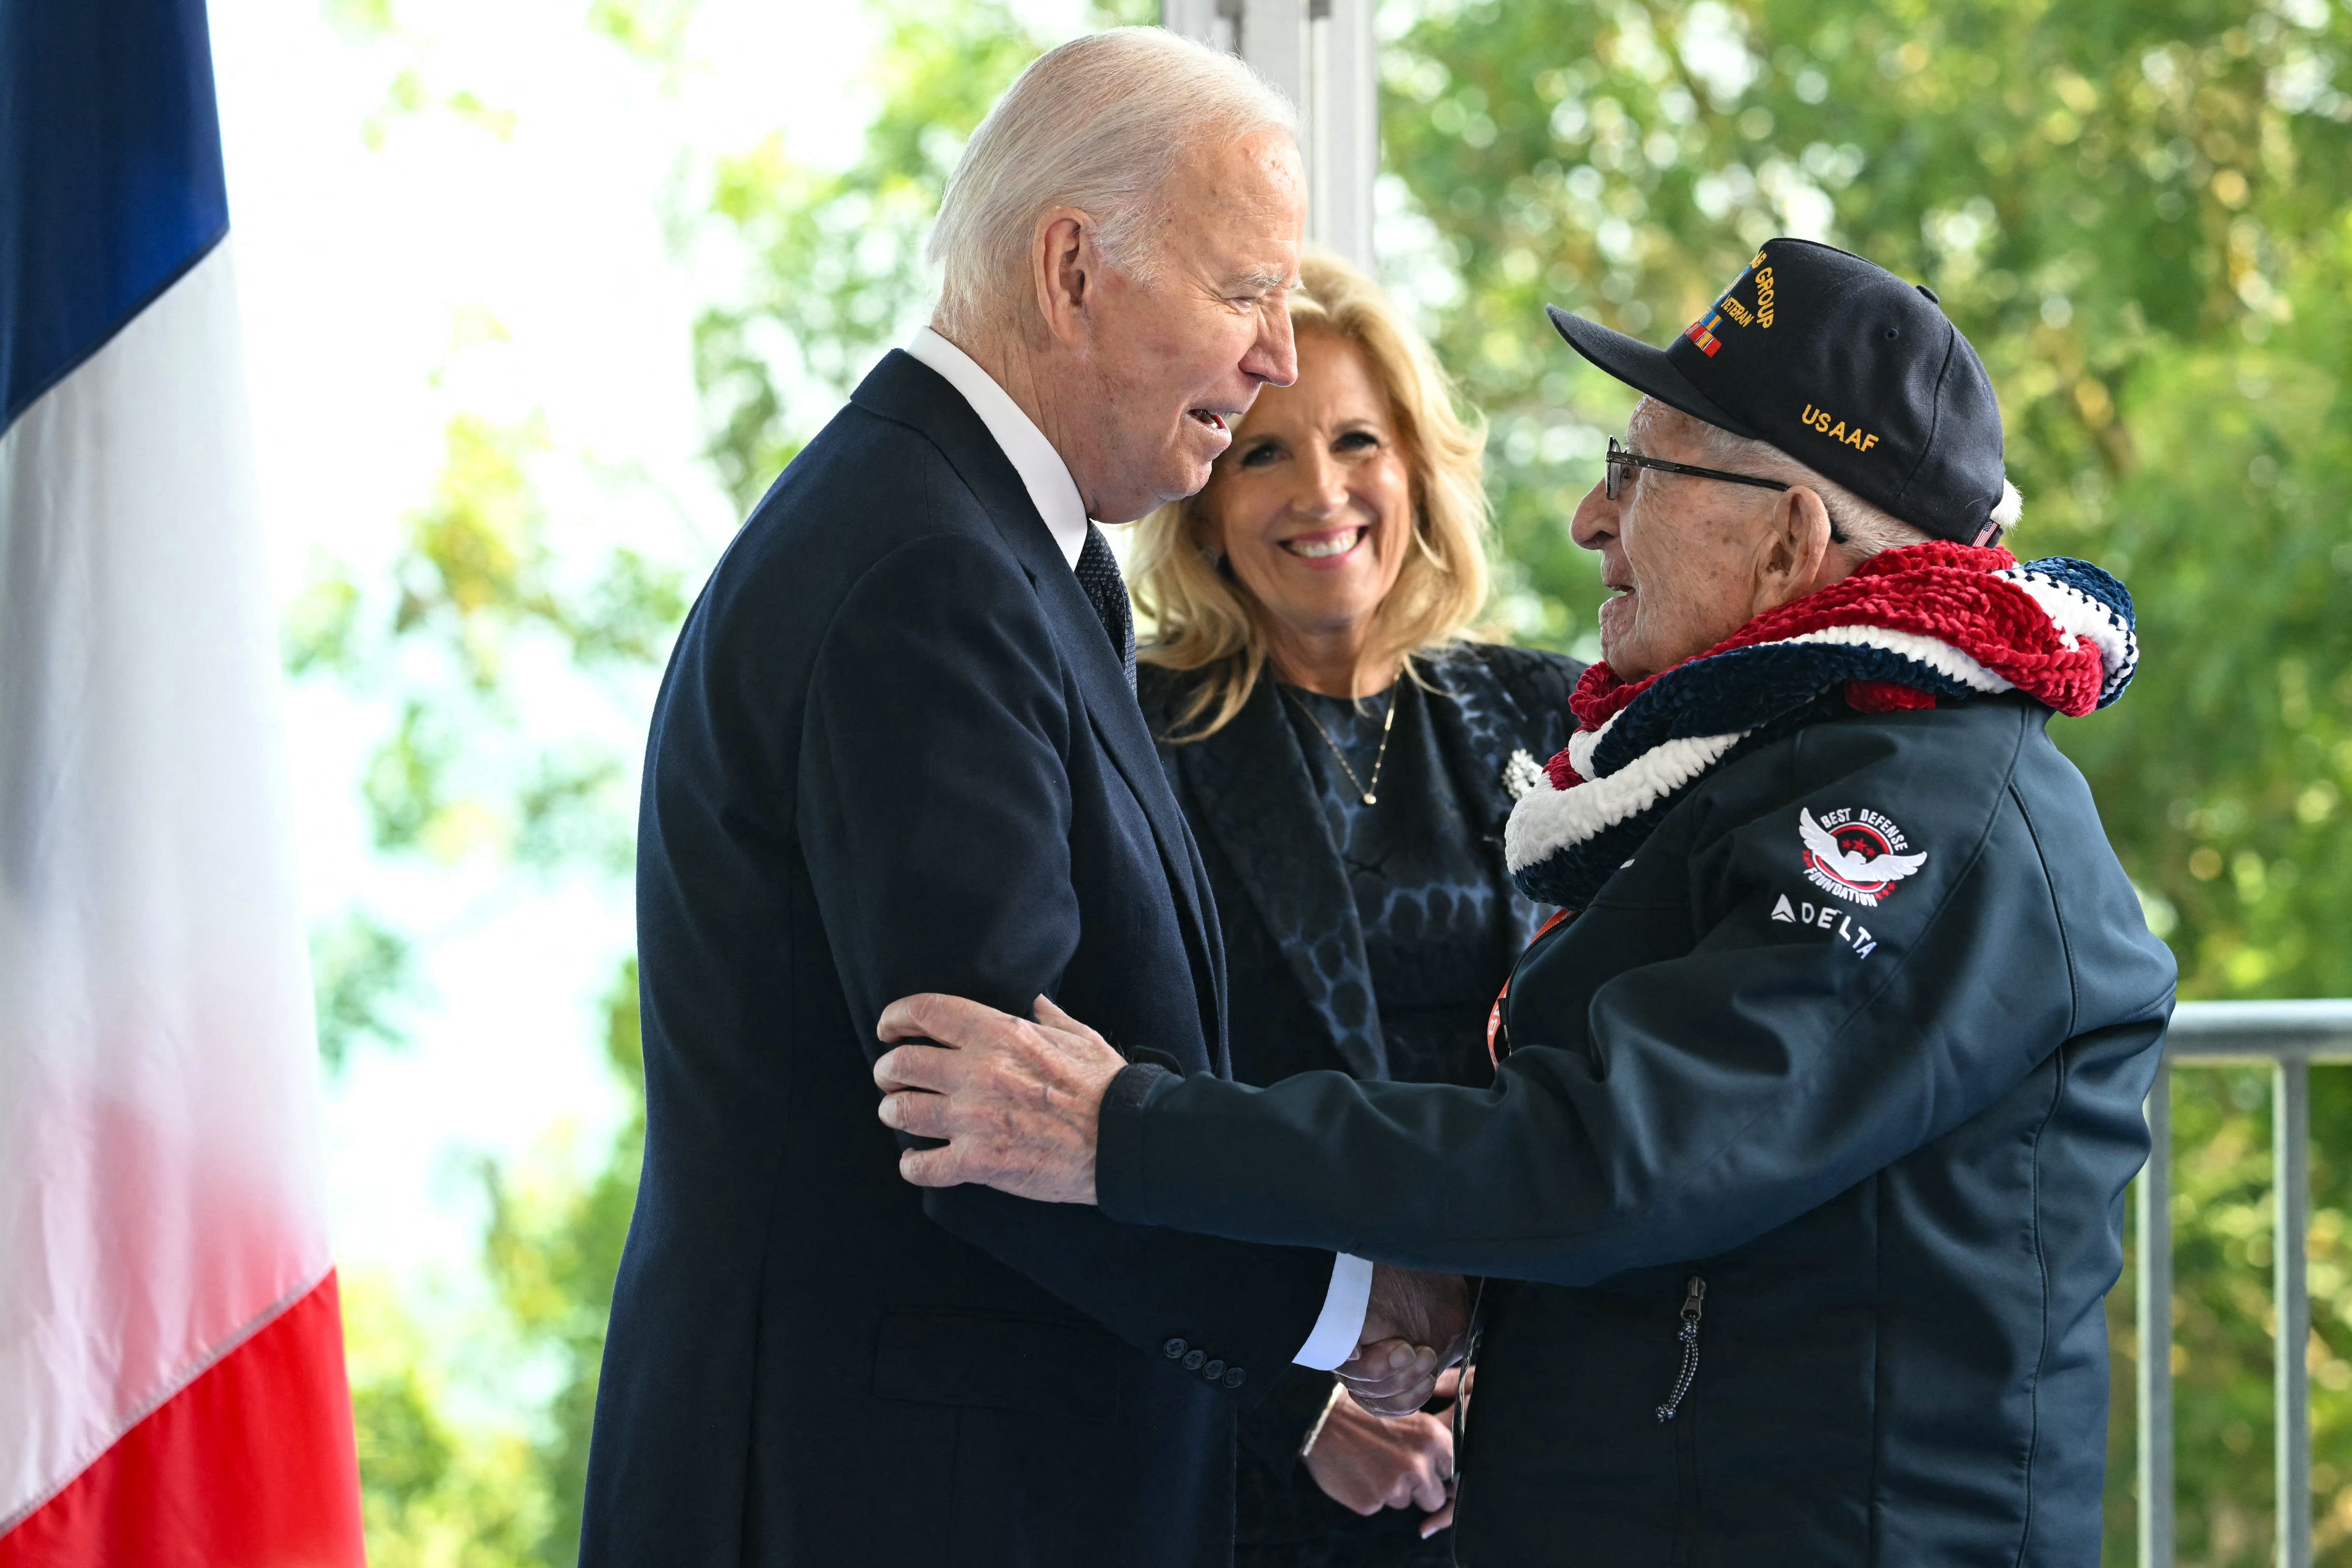 Biden on D-Day anniversary: These fallen saved the world. 'Let us be worthy of their sacrifice'